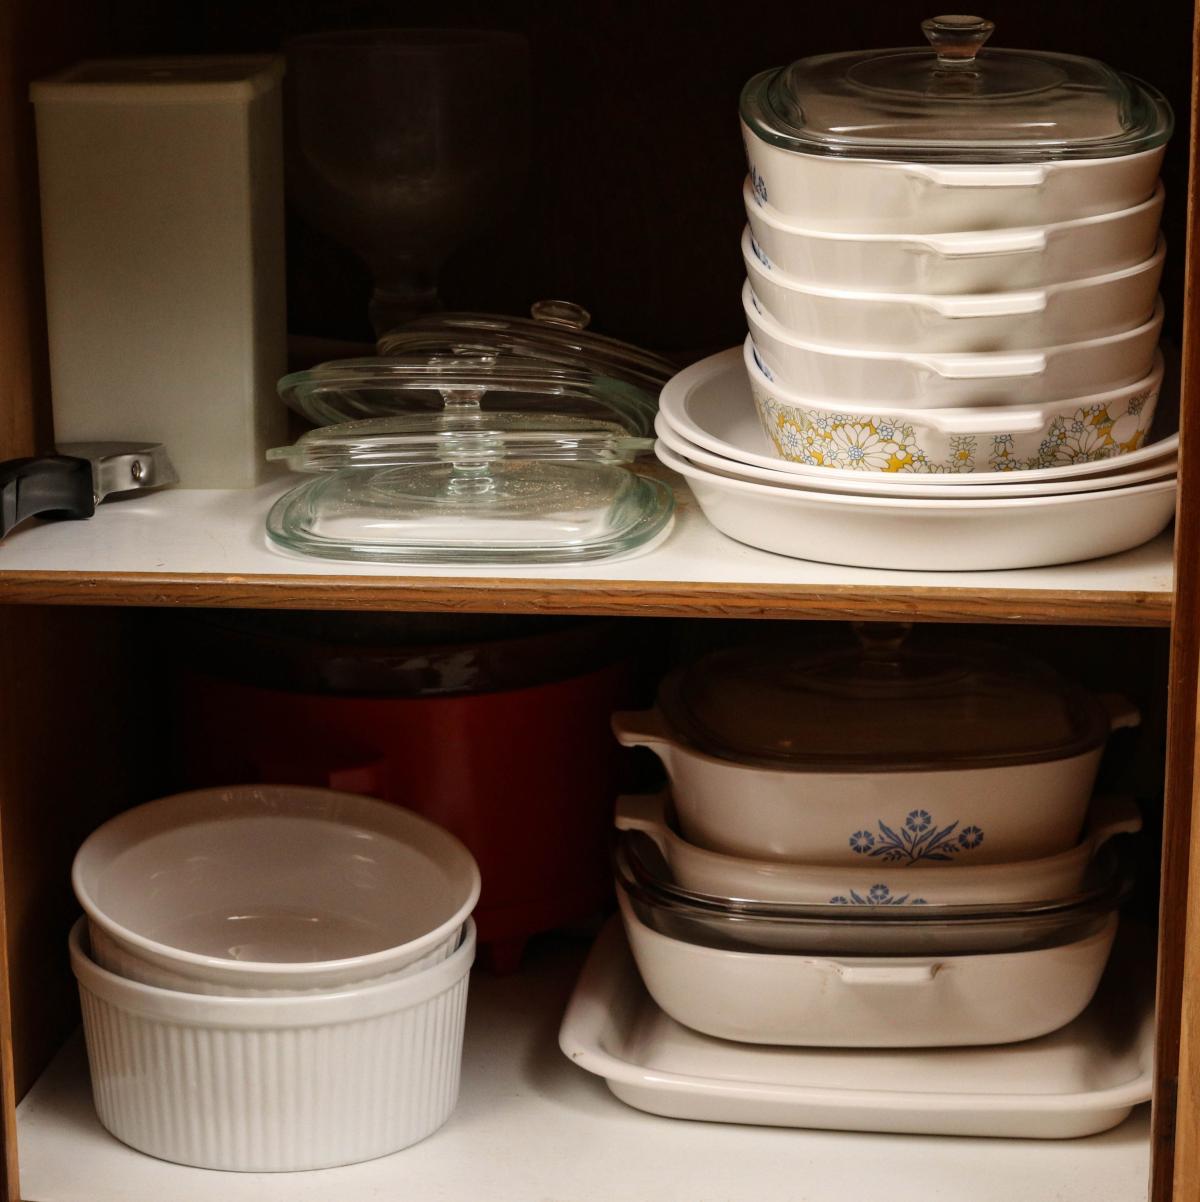 CORNING WARE AND OTHER KITCHEN ITEMS